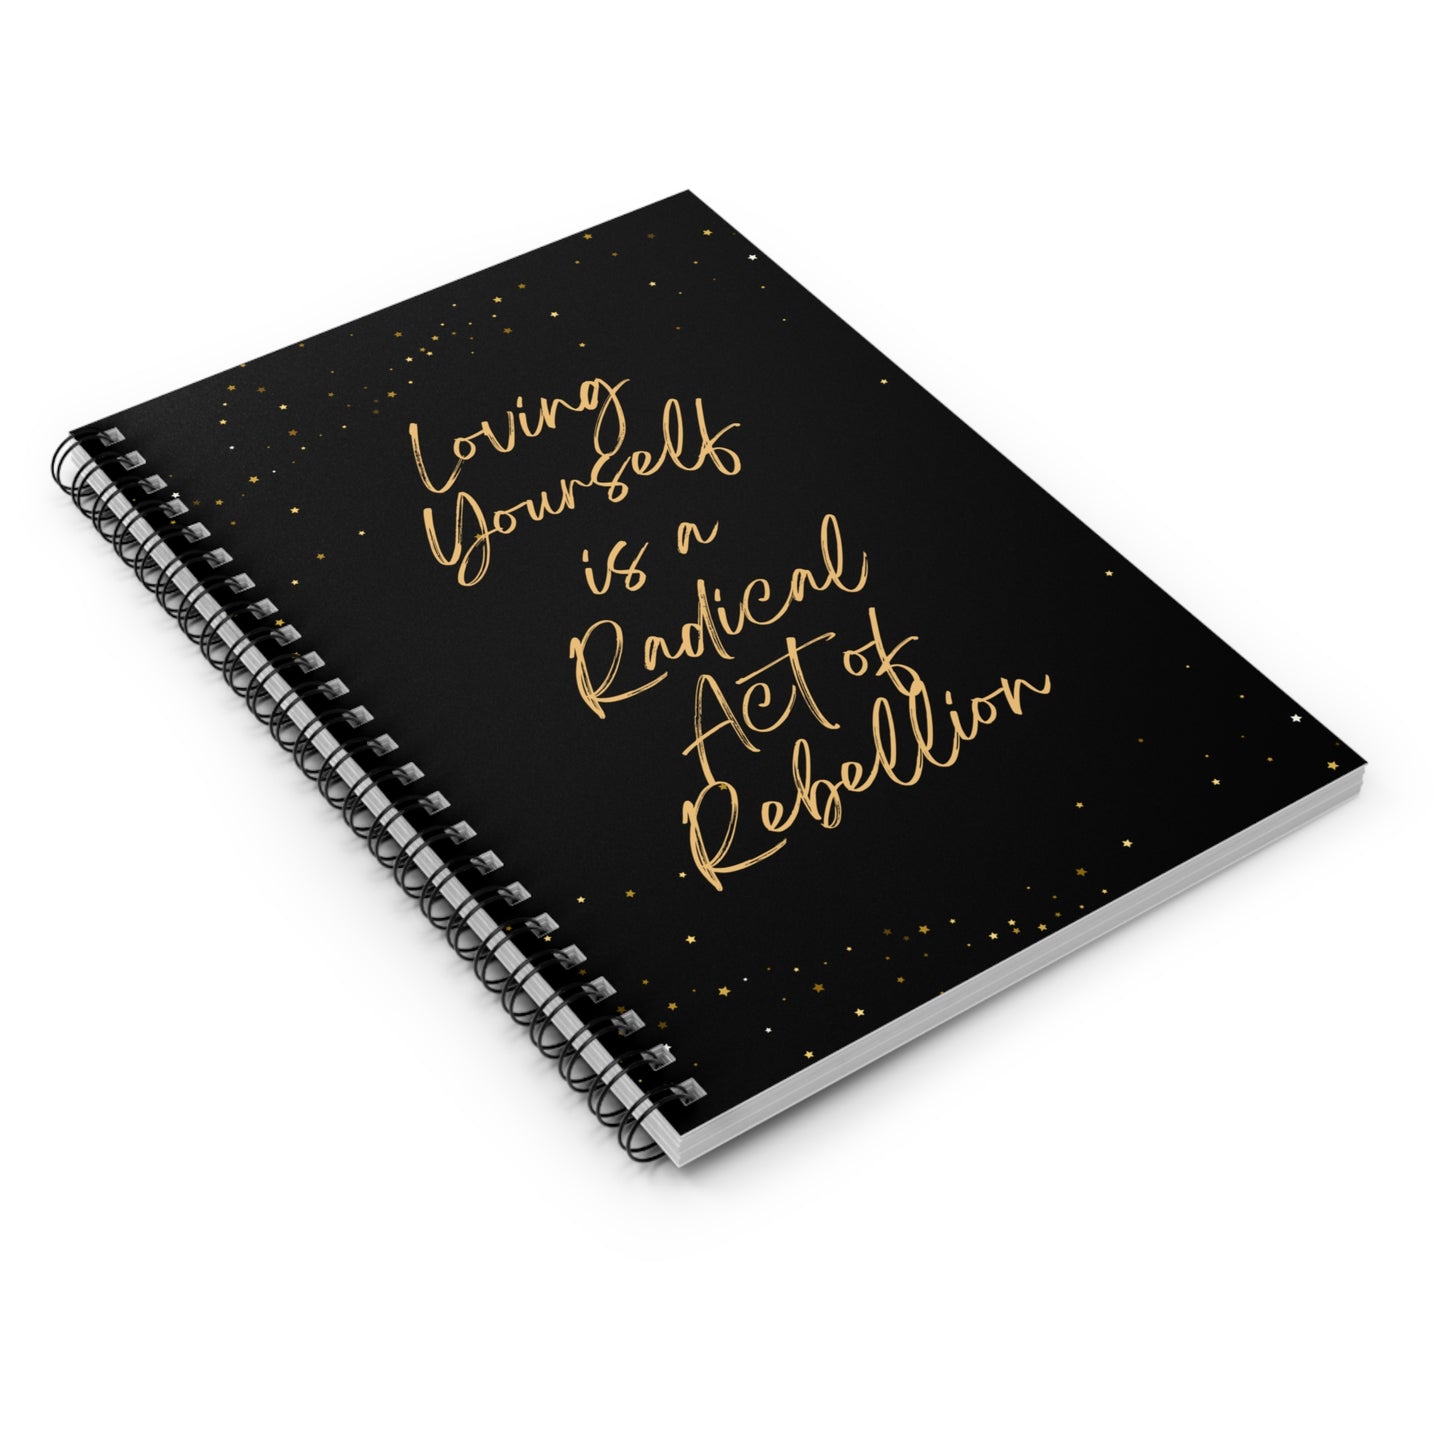 "Loving Yourself is a Radical Act of Rebellion" Empowering Spiral Notebook